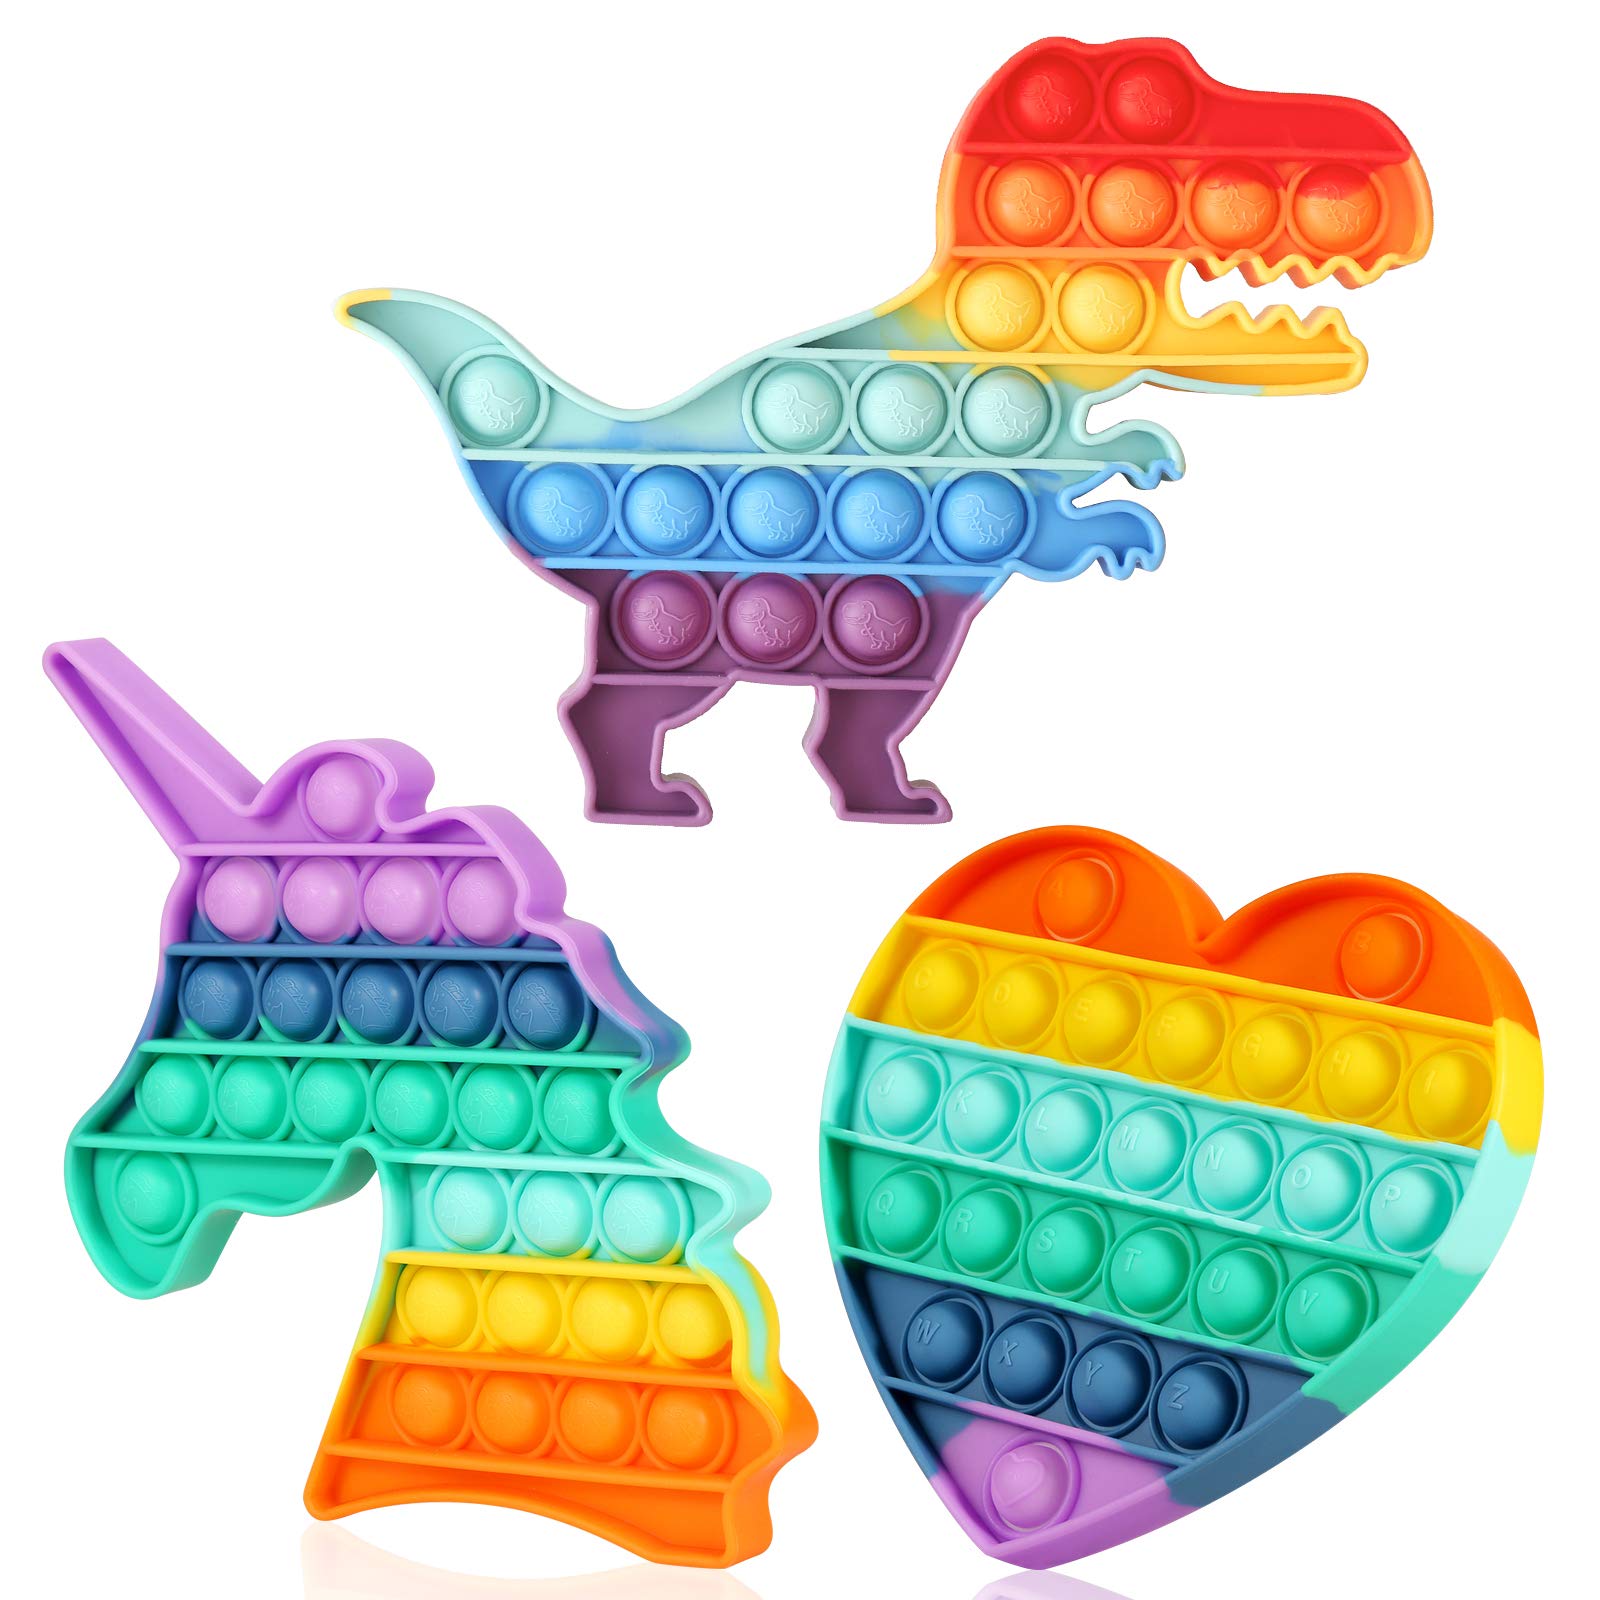 Fescuty Rainbow Fidget Toys Heart Sensory Toys Autism Learning Materials for Anxiety Stress Relief Squeeze Toy